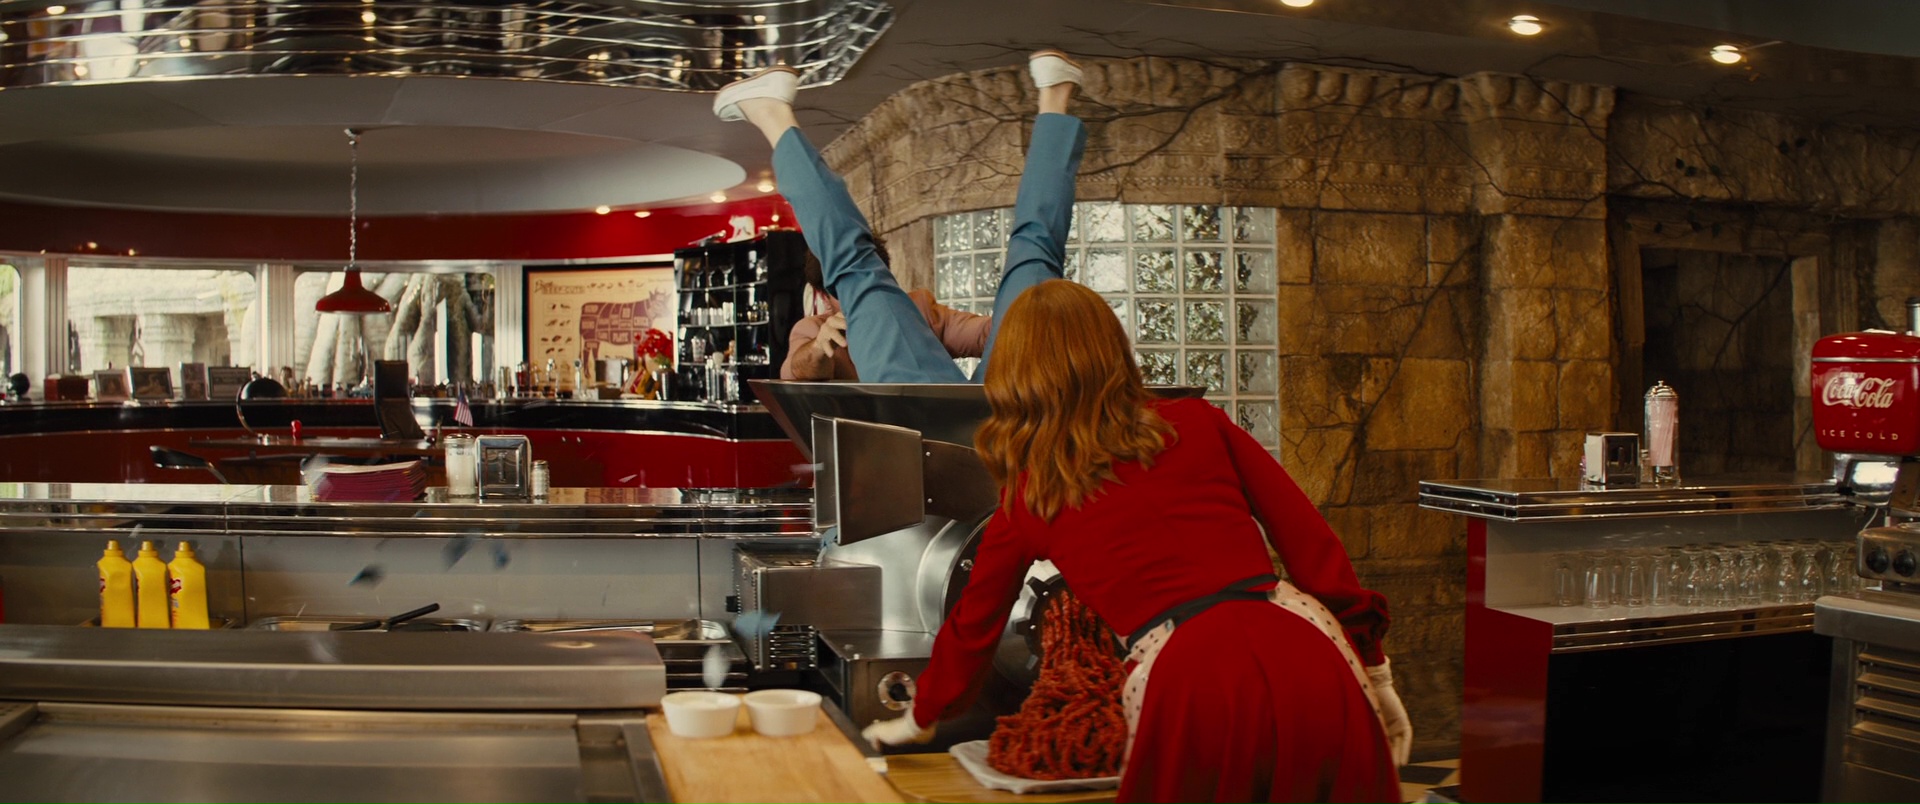 Coca-Cola and Julianne Moore in Kingsman 2: The Golden Circle (2017) Movie